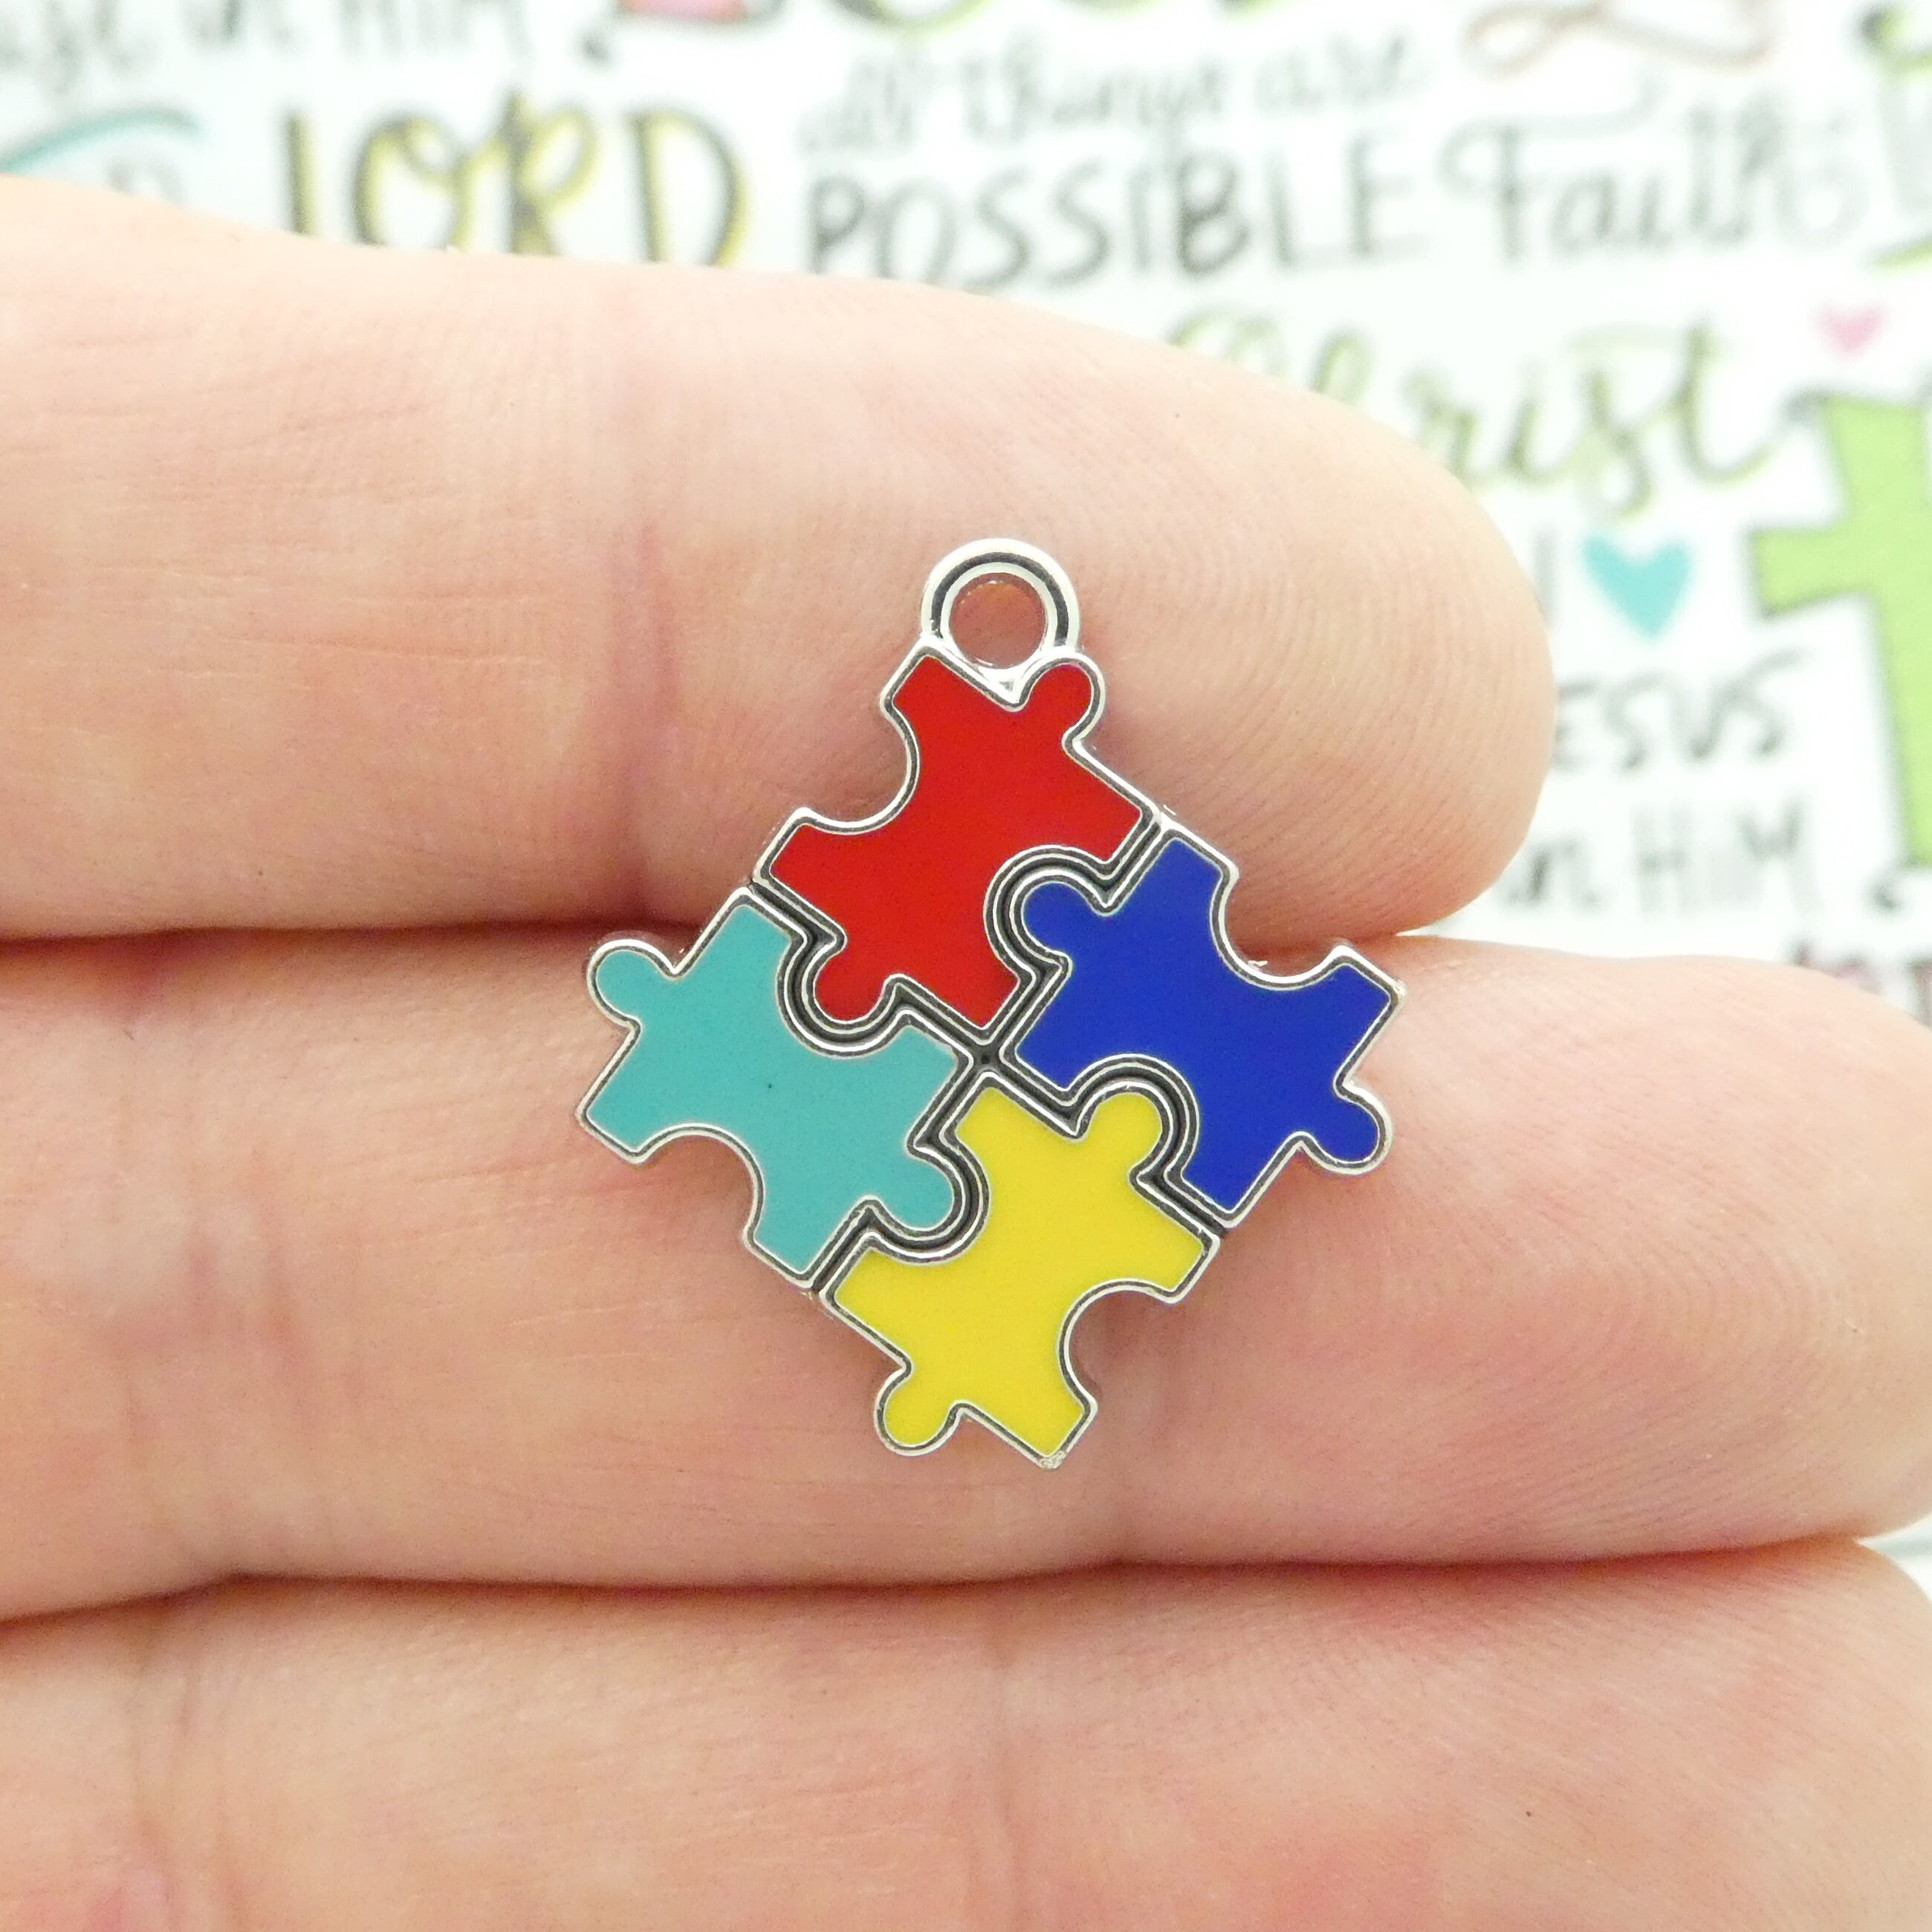 Multi-Colored Bead Stretch Charm Bracelet Autism Awareness Puzzle Piece and Pray for A Cure Charms